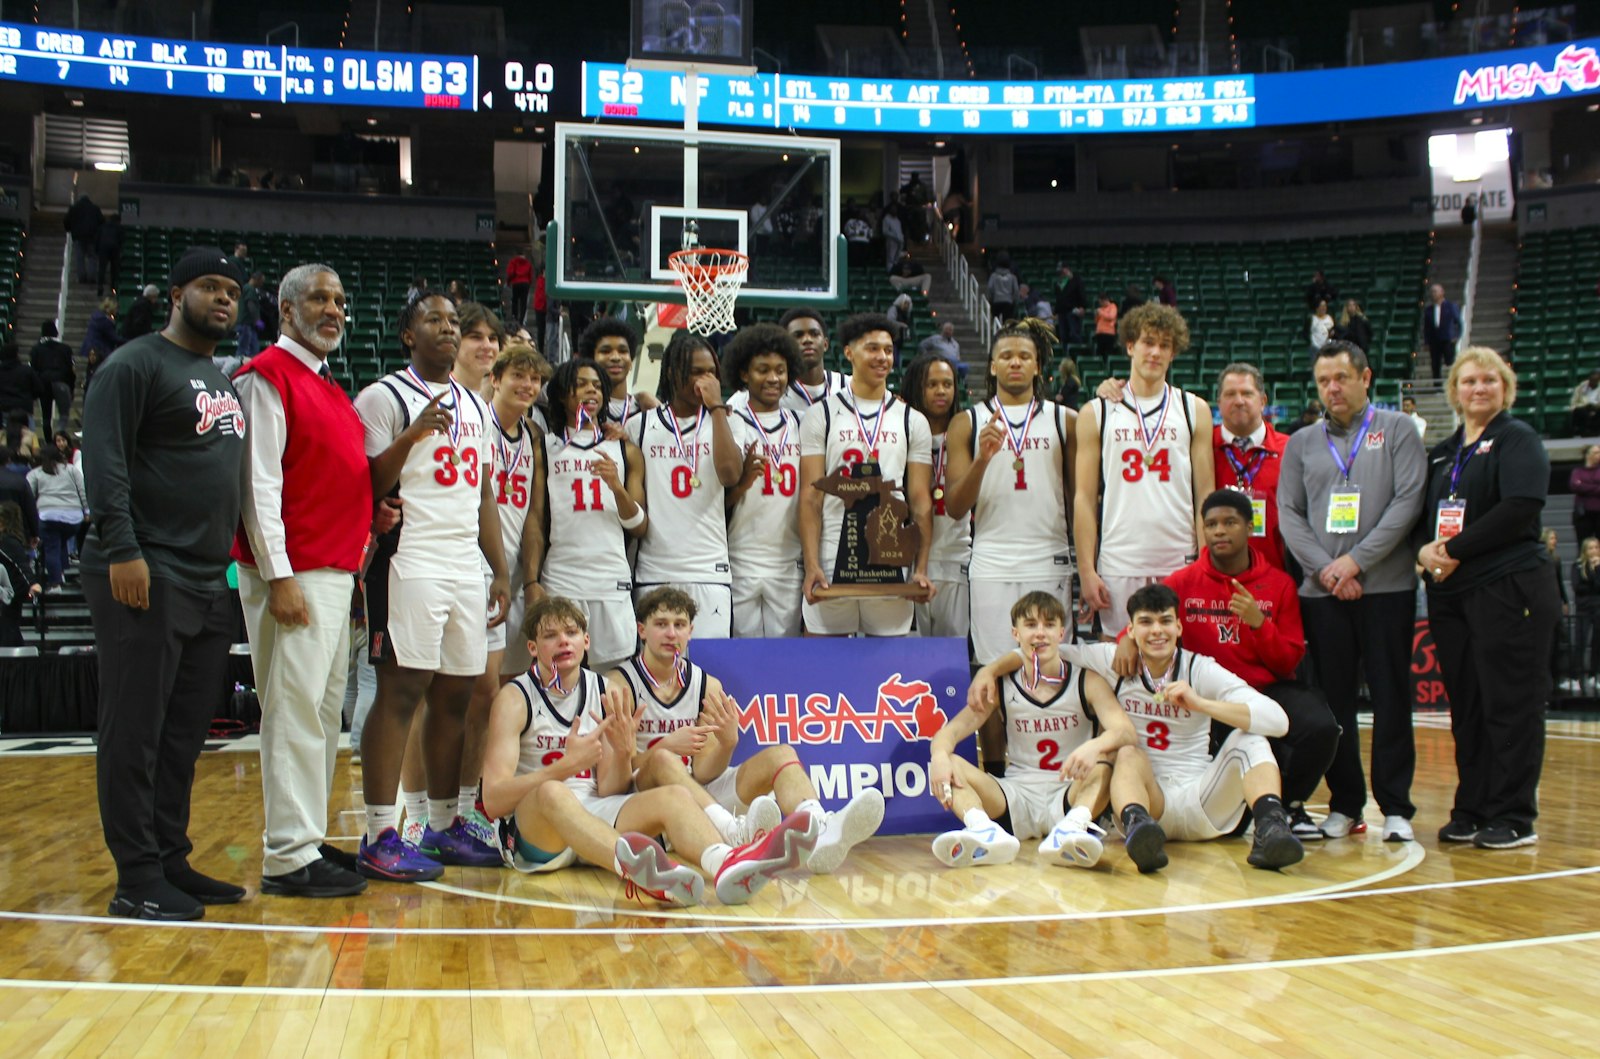 With Saturday’s victory over North Farmington, Orchard Lake St. Mary’s won its first state basketball championship in 24 seasons. The Eaglets have the rare distinction of earning titles in Class D (1978), Class C (1982), Class B (2000) and Class A/Division 1 (this year).